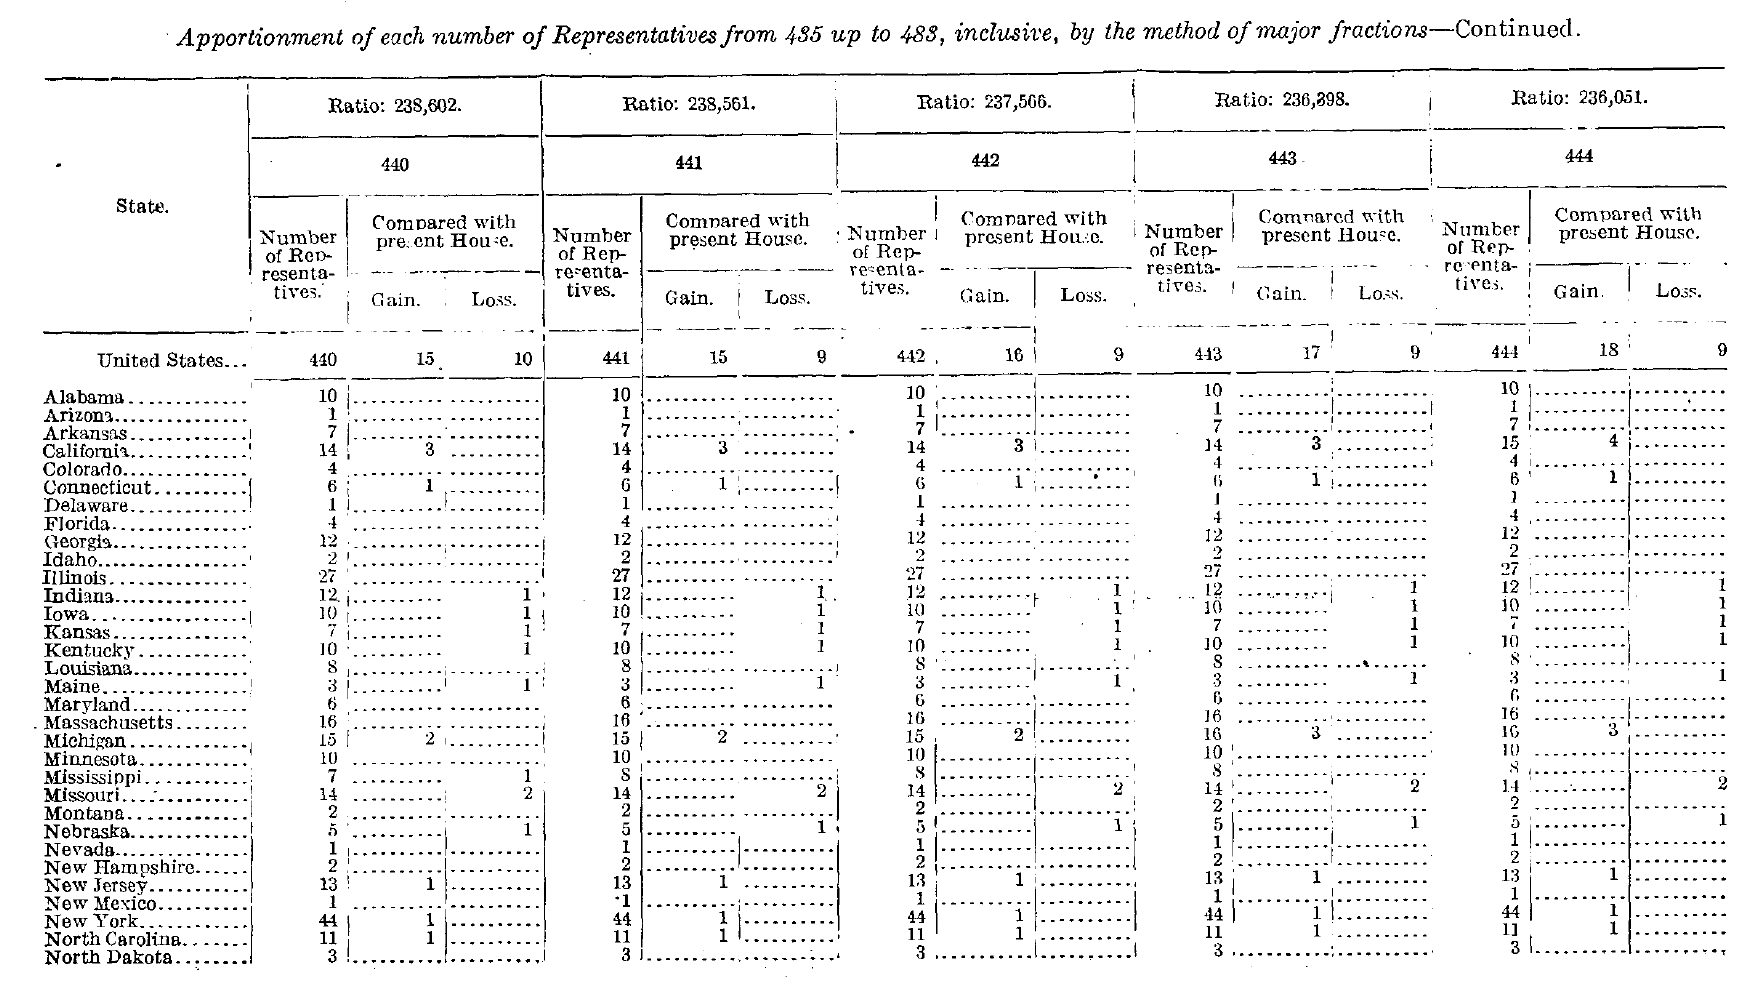 table showing all of the states in the US and then listing whether each gained or lost a seat for a House of 440 seats or 441 seats or 442 seats or 443 seats or 444 seats